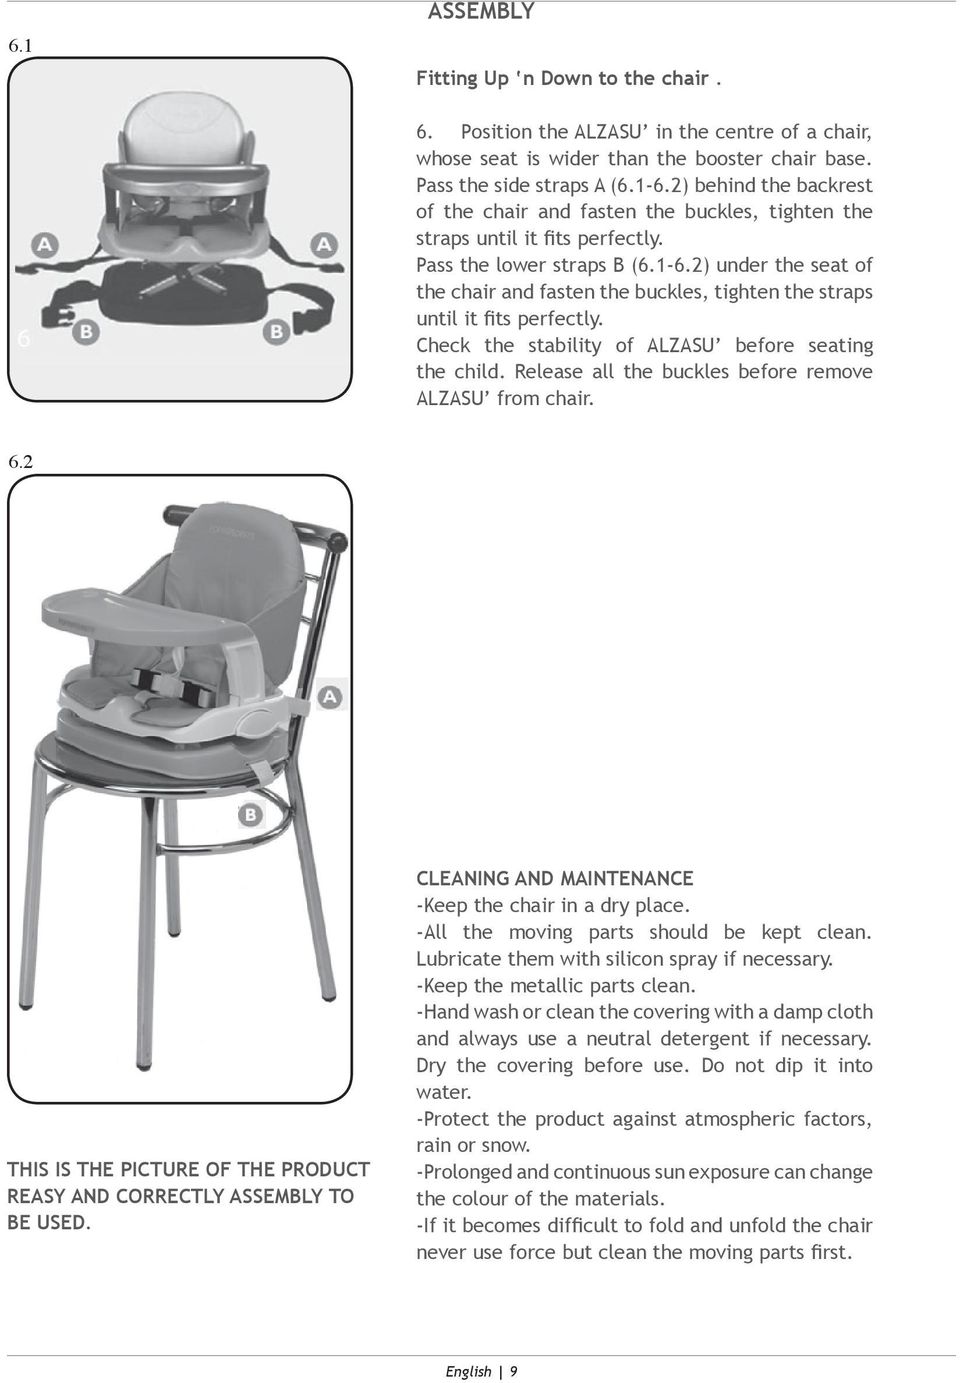 2) under the seat of the chair and fasten the buckles, tighten the straps until it fits perfectly. Check the stability of ALZASU before seating the child.